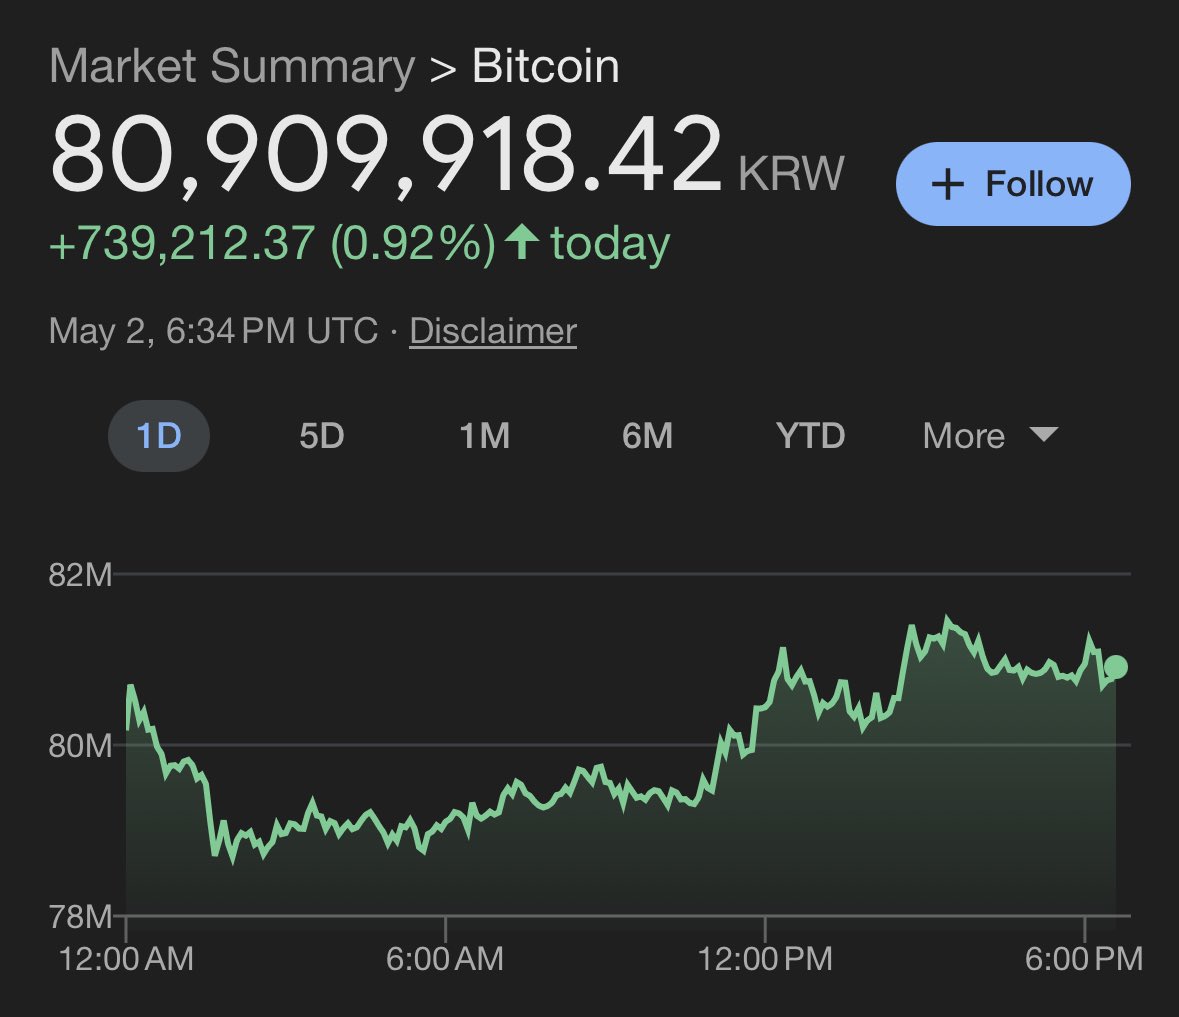 Just checked the BTC price… WOW … had to sit down for a minute … this must be from the future…